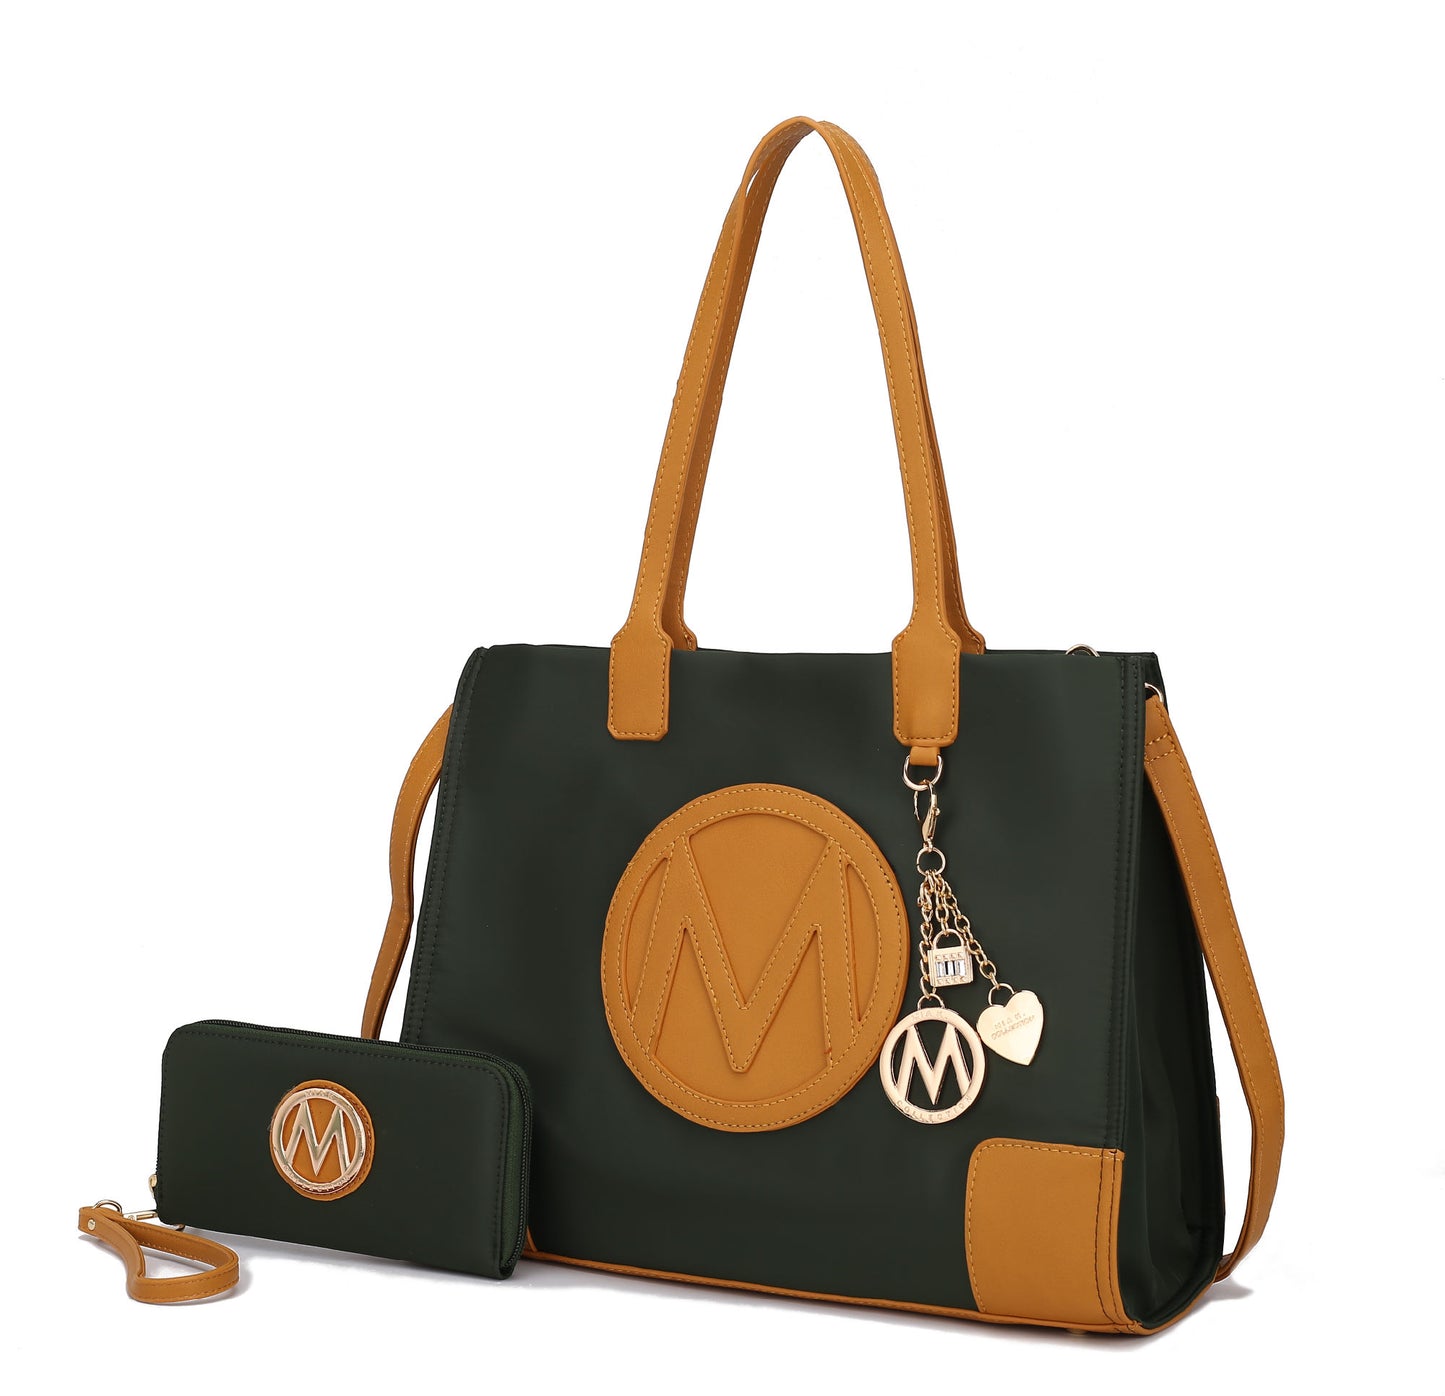 MKF Collection Louise Tote and Wallet Set by Mia k